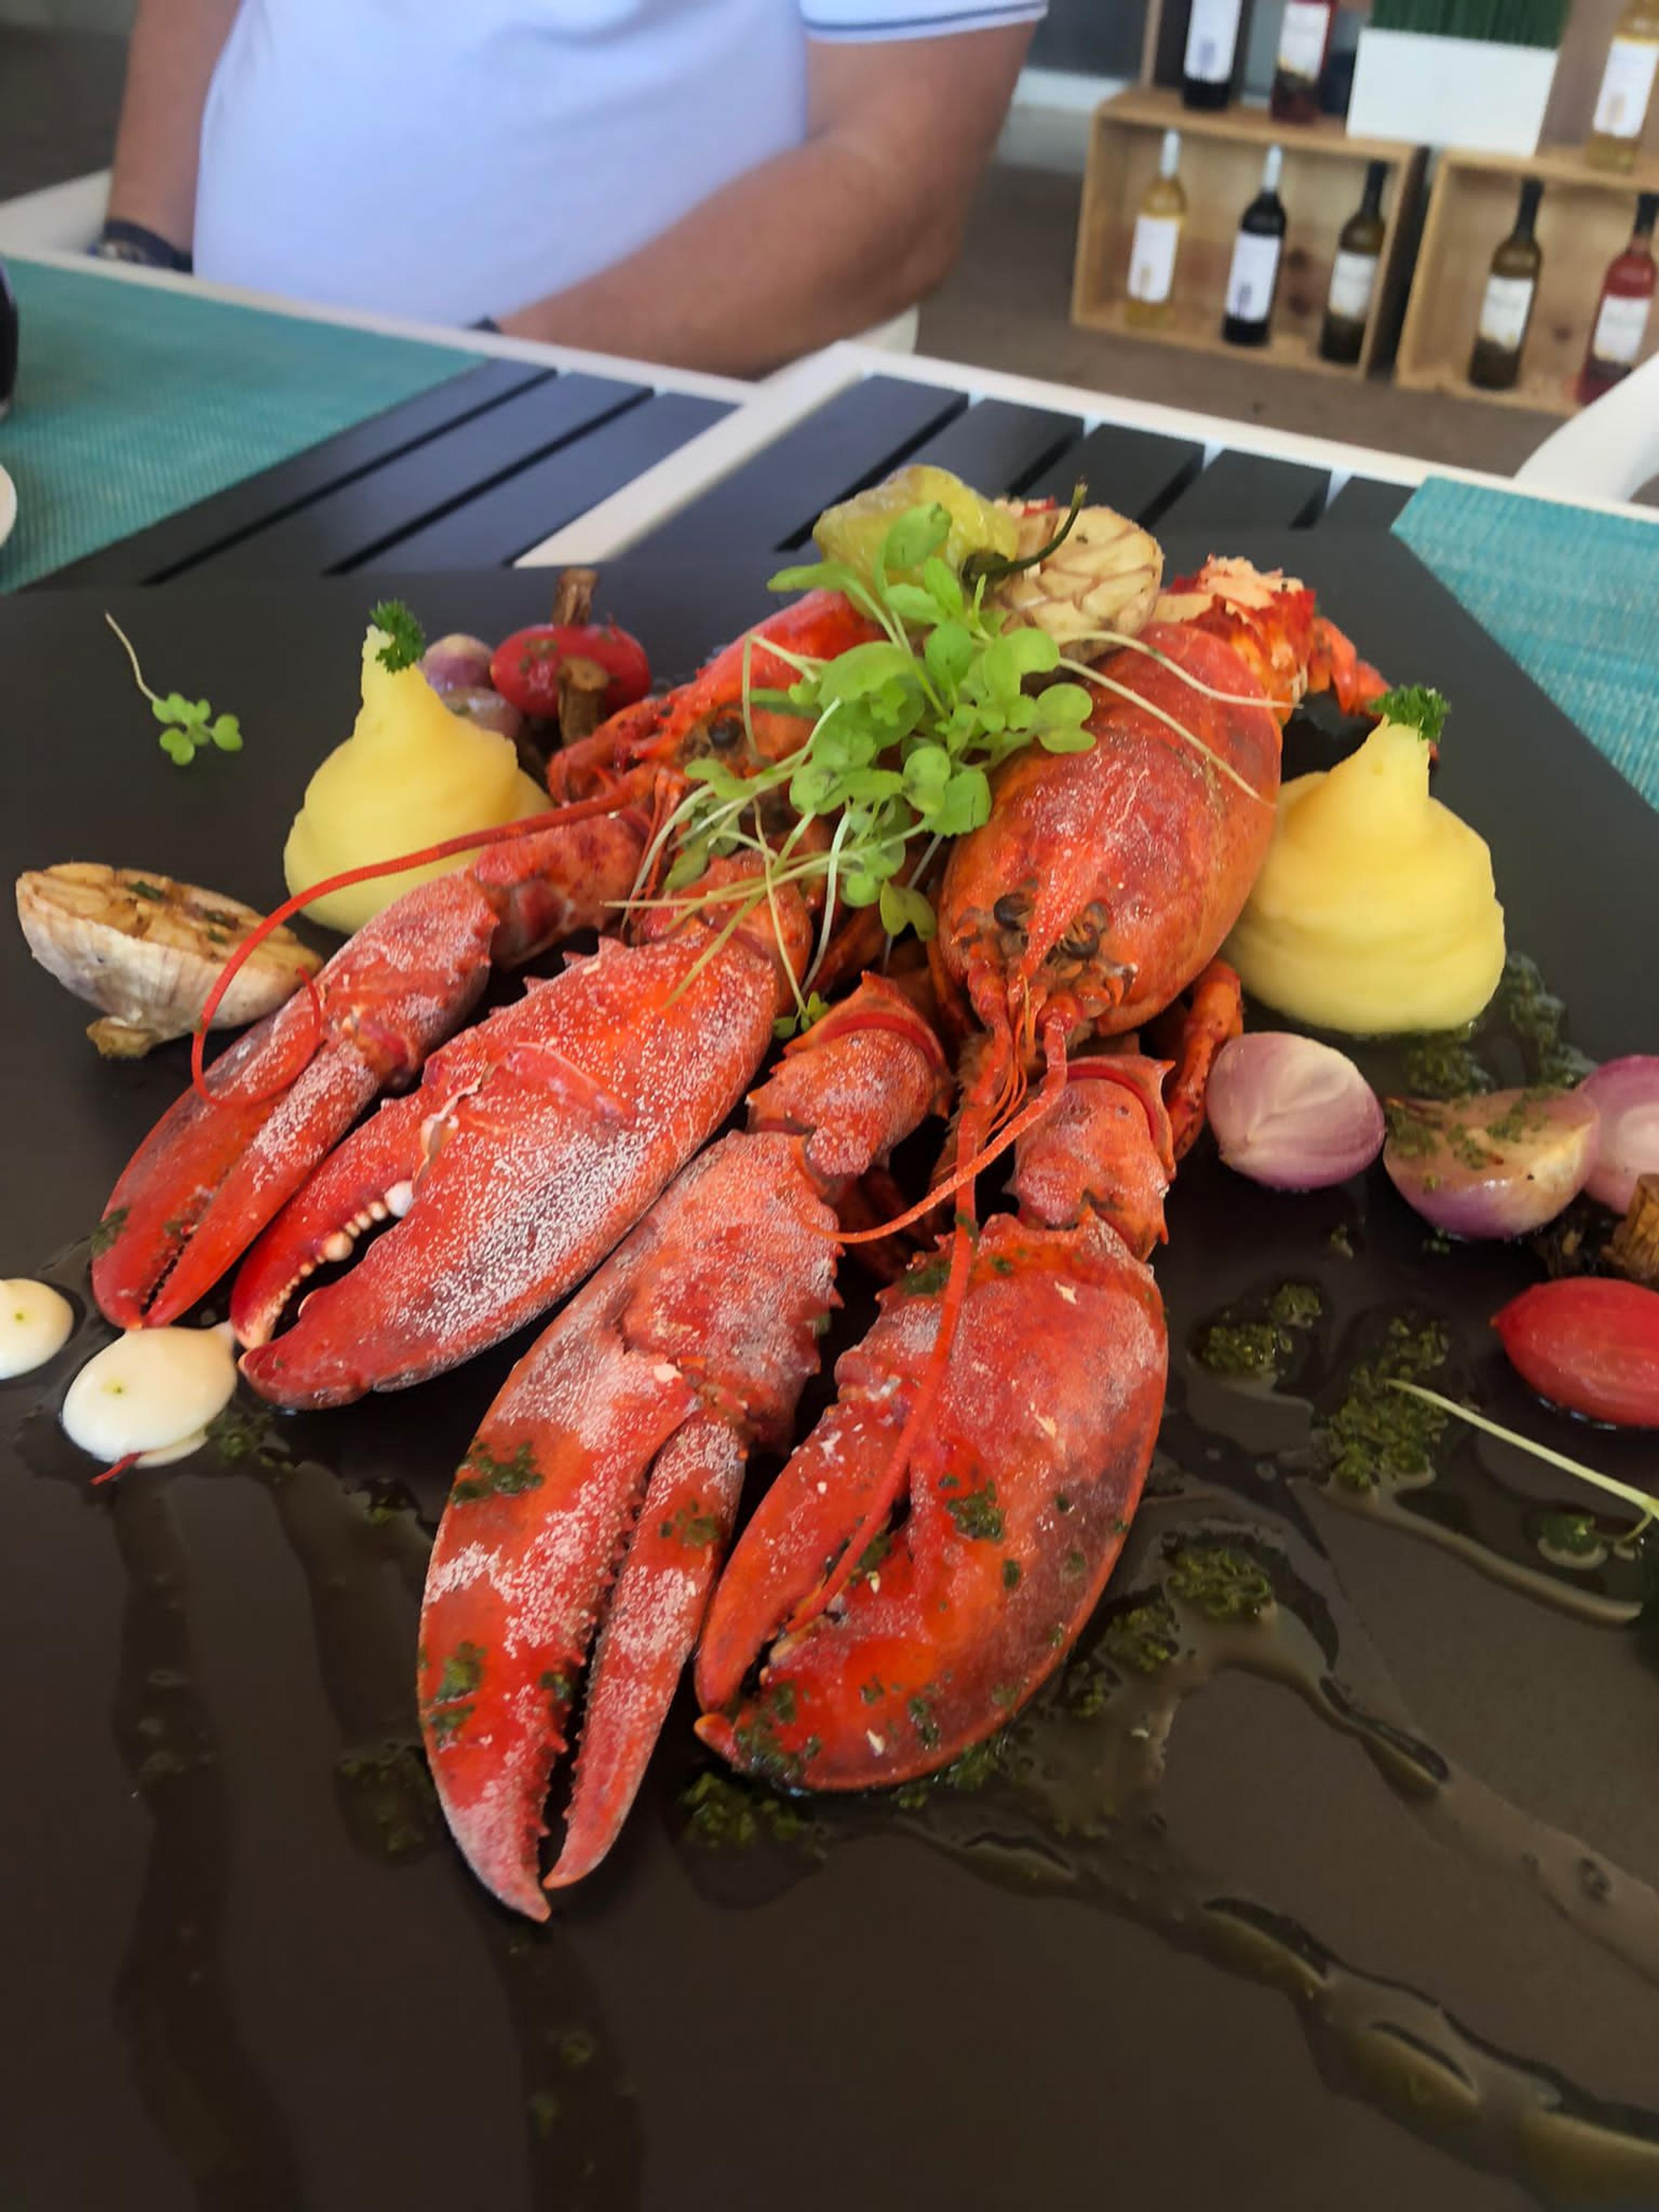 Lobster for lunch - at Helios, absolutely!